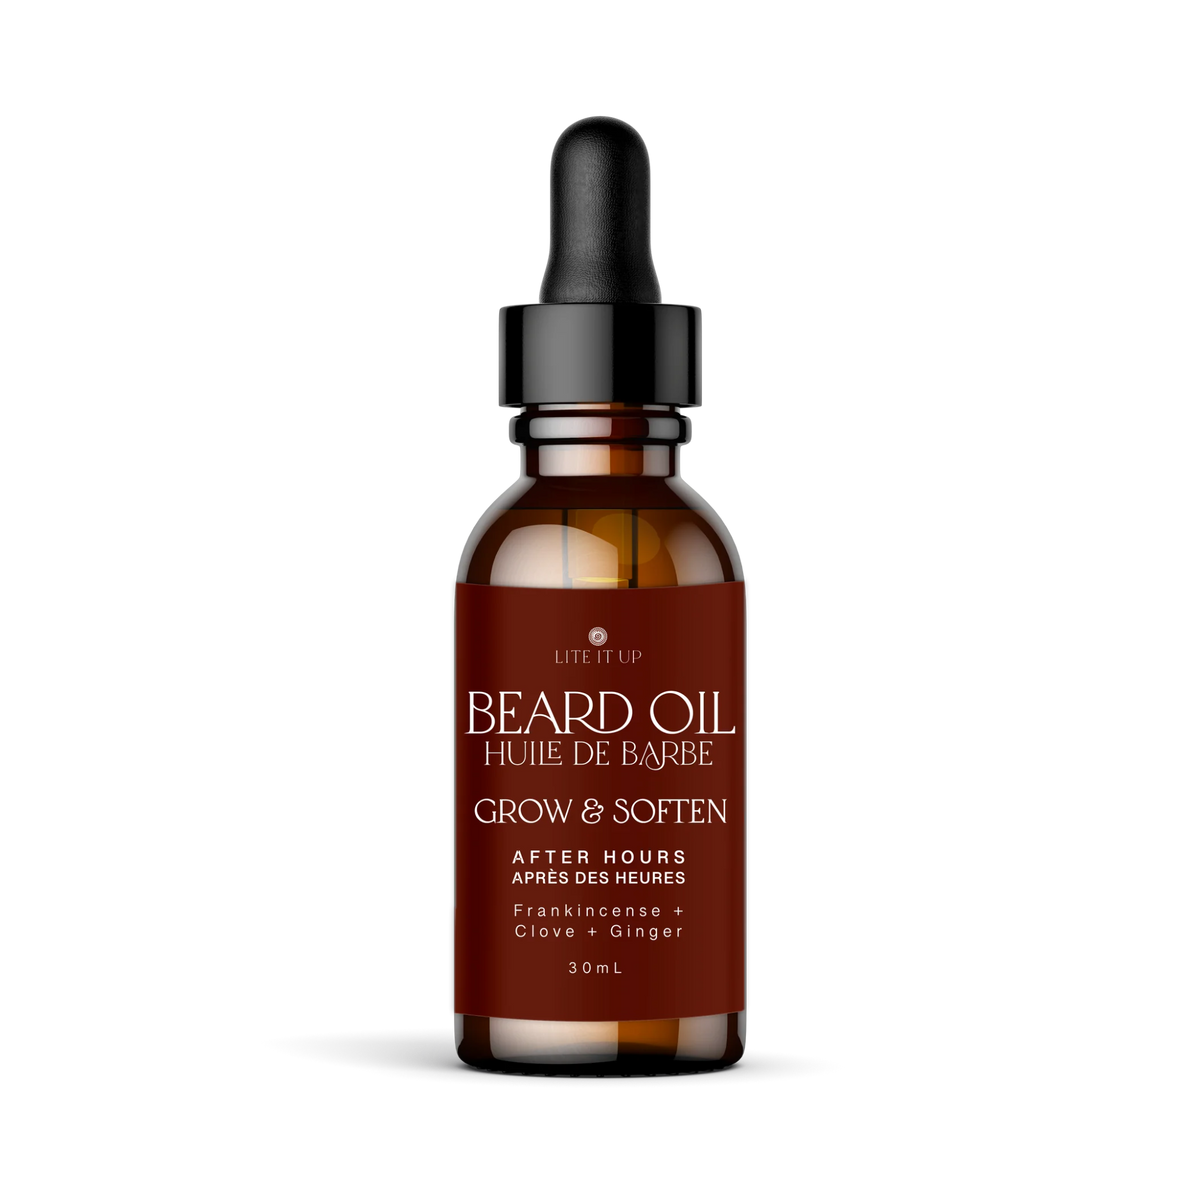 BEARD OIL - AFTER HOURS